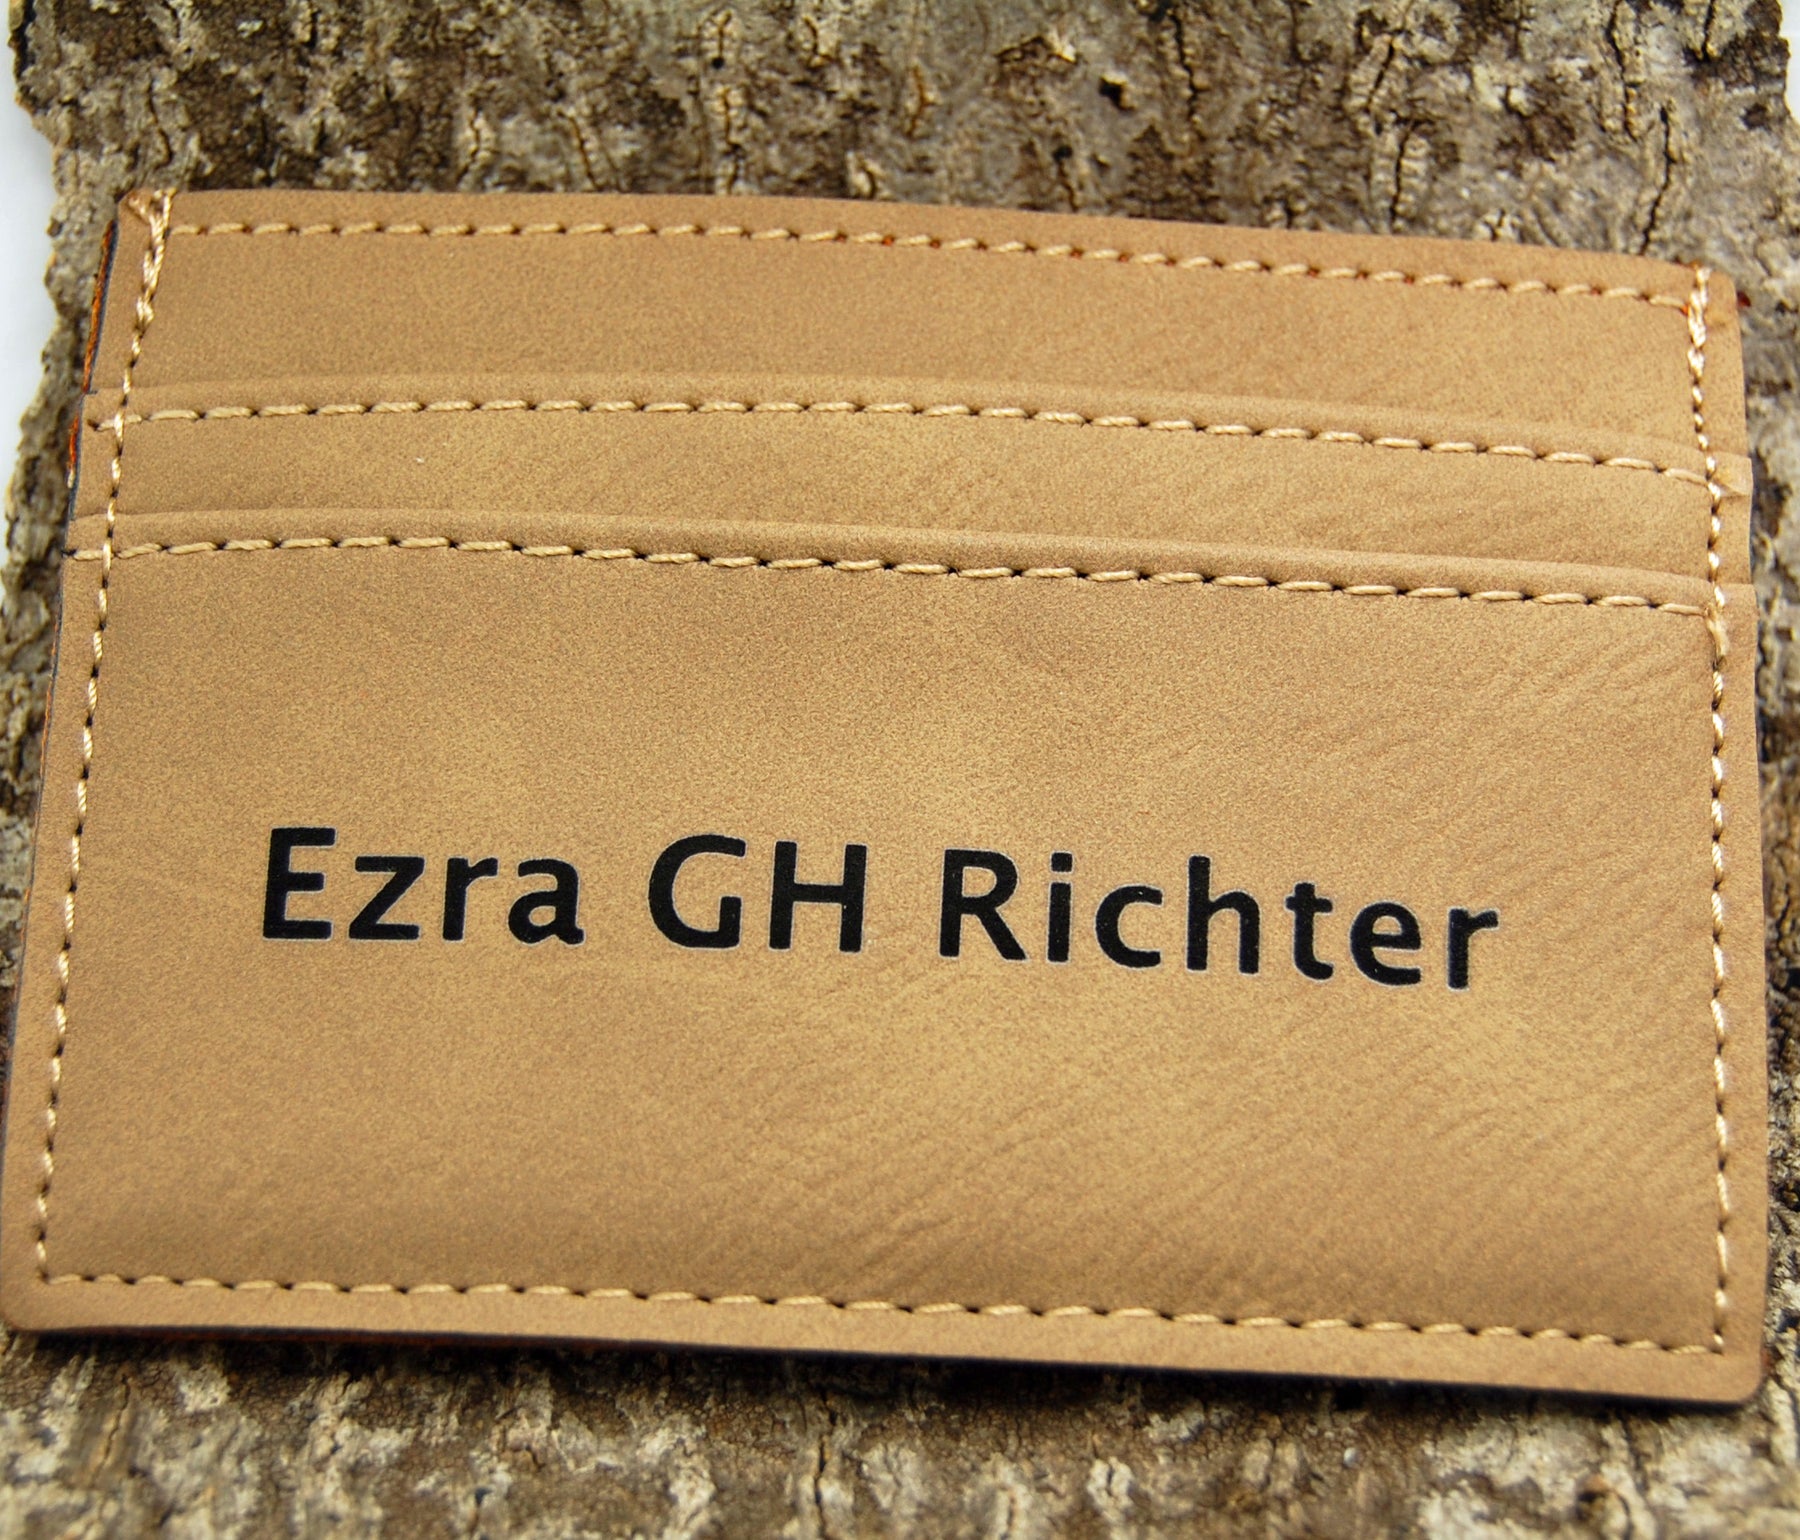 Customizable Rawhide Leatherette Wallet and Money Clip - Minter and Richter Designs